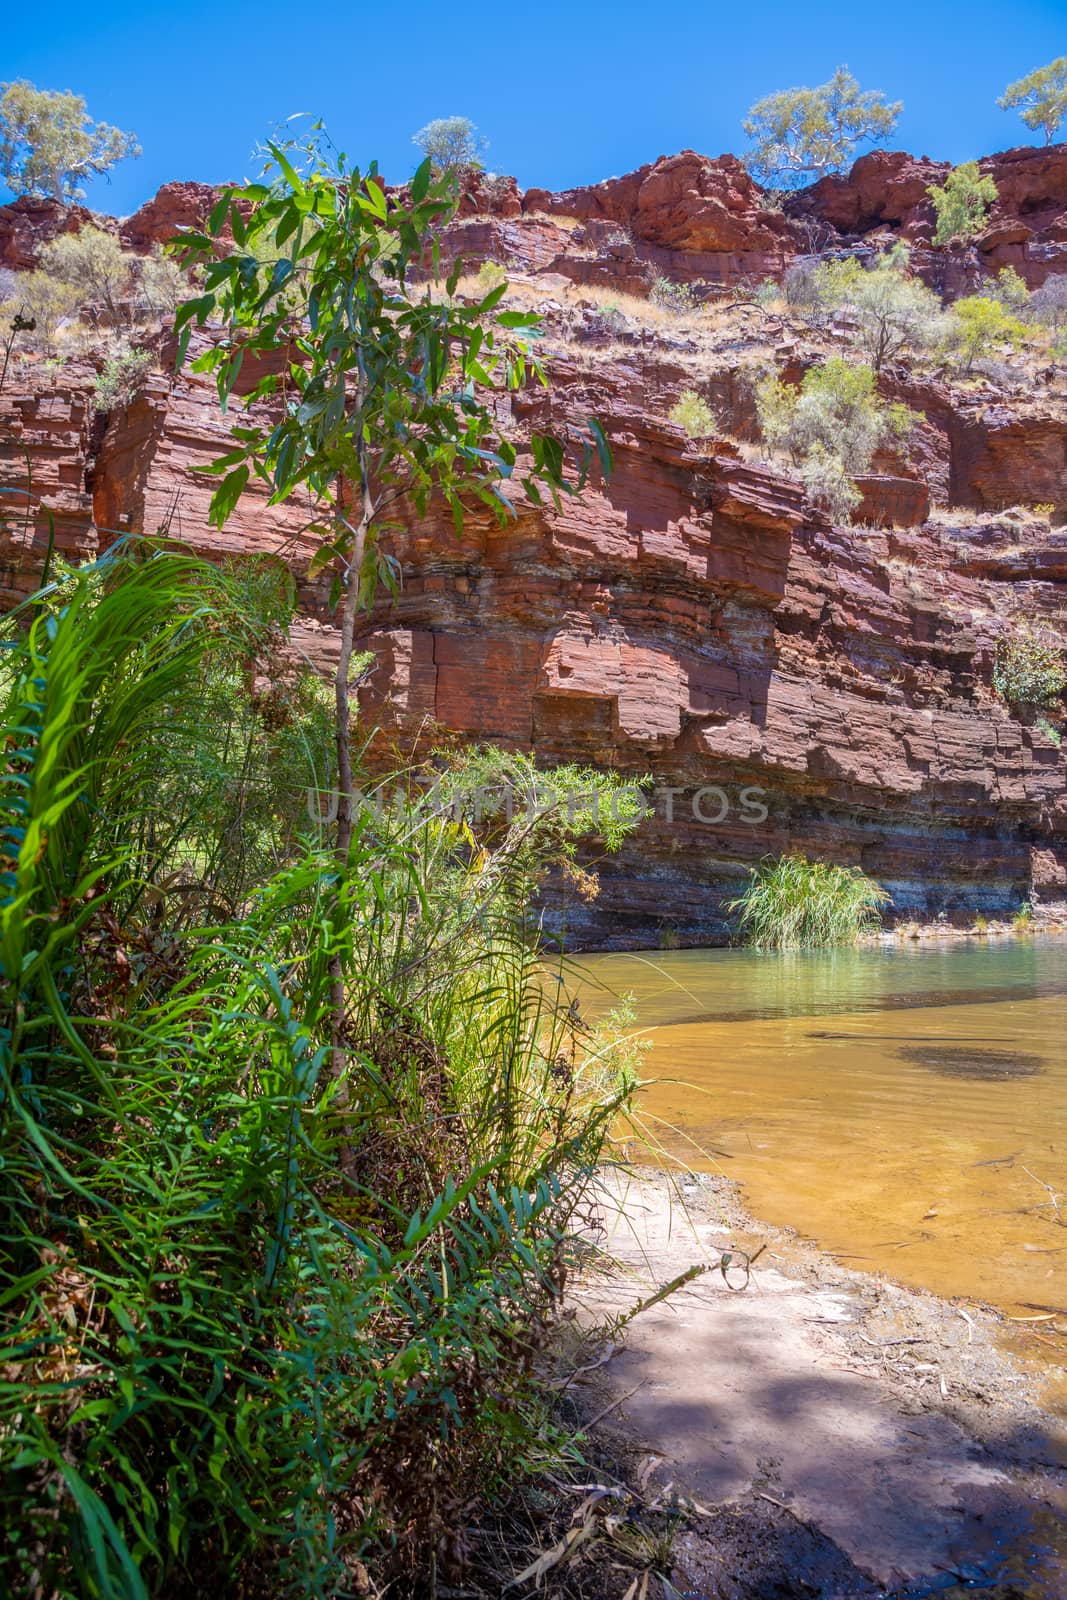 Pool and green vegetation at bottom of Dales Gorge Fortescue Falls Karijini National Park by MXW_Stock